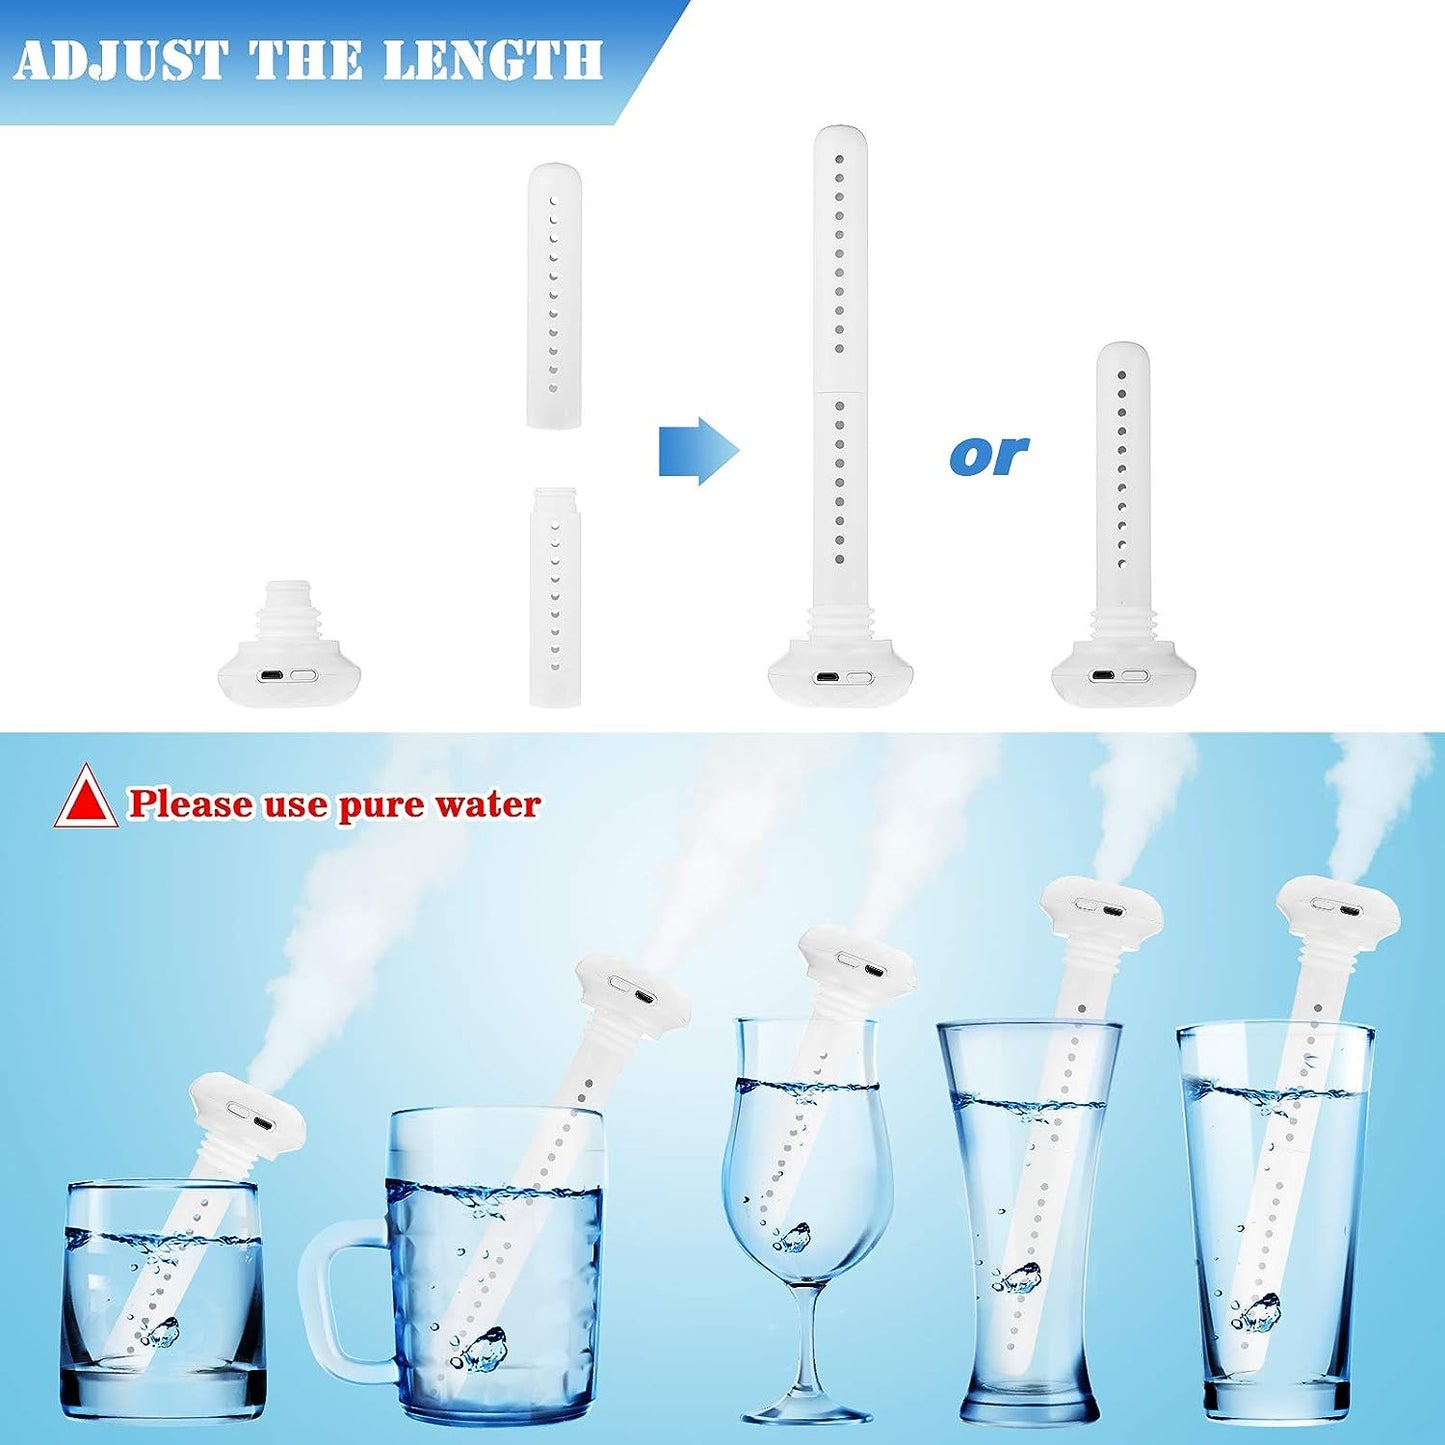 2 Pieces Mini Portable Humidifier Cool Mist Humidifier with 6 Pieces Replacement Humidifier Sticks USB Air Humidifier without Water Bottle for Travel Office Hotel Car Home (White)